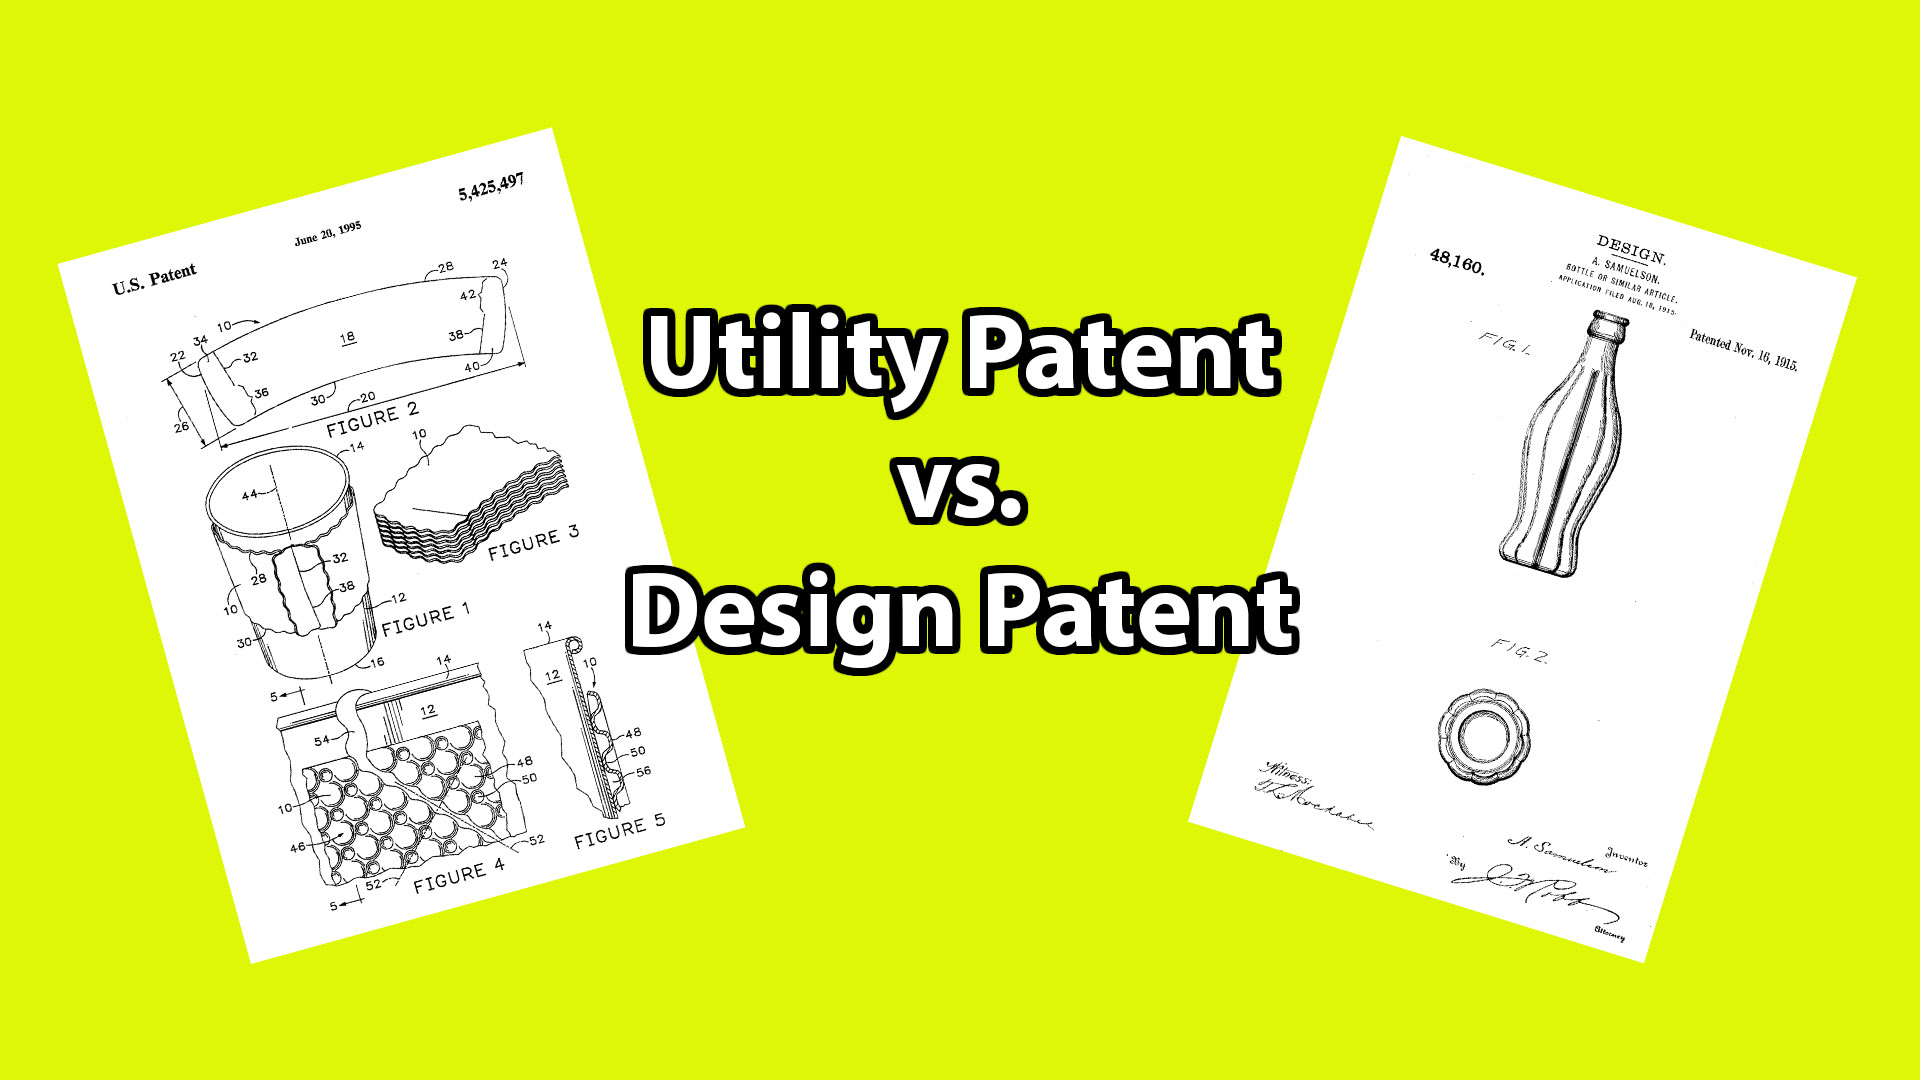 What Is a Design Patent?